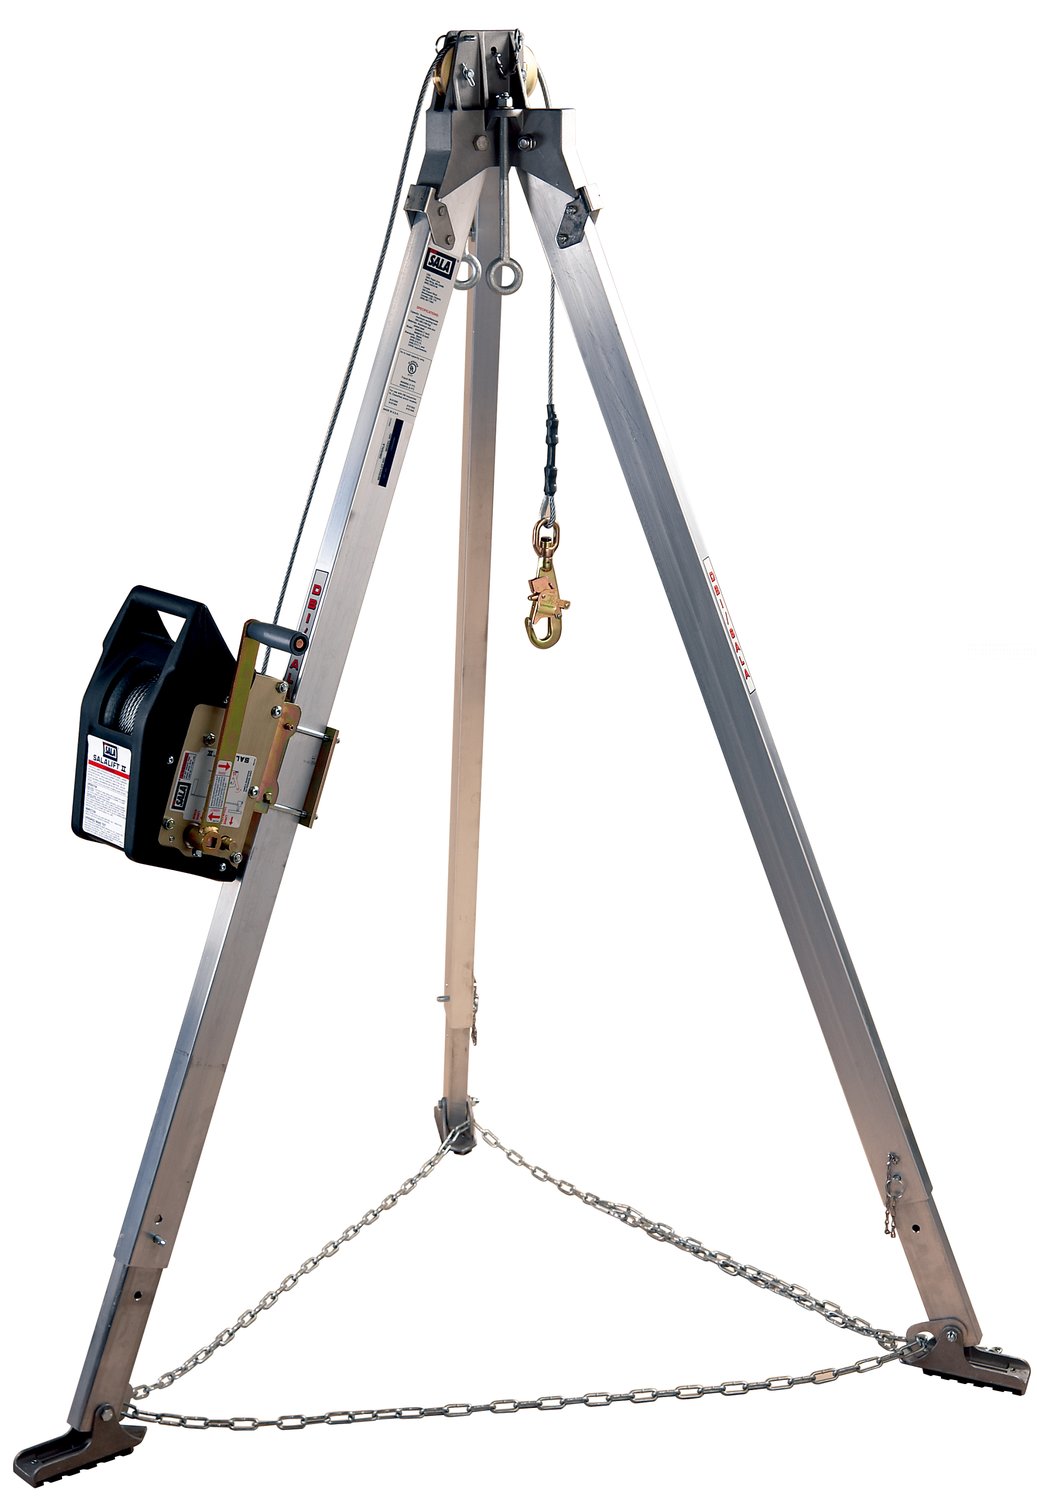 7100240697 - 3M DBI-SALA Confined Space Aluminum Tripod with Winch 8300031, 7 ft High, 60 ft Stainless Steel Cable